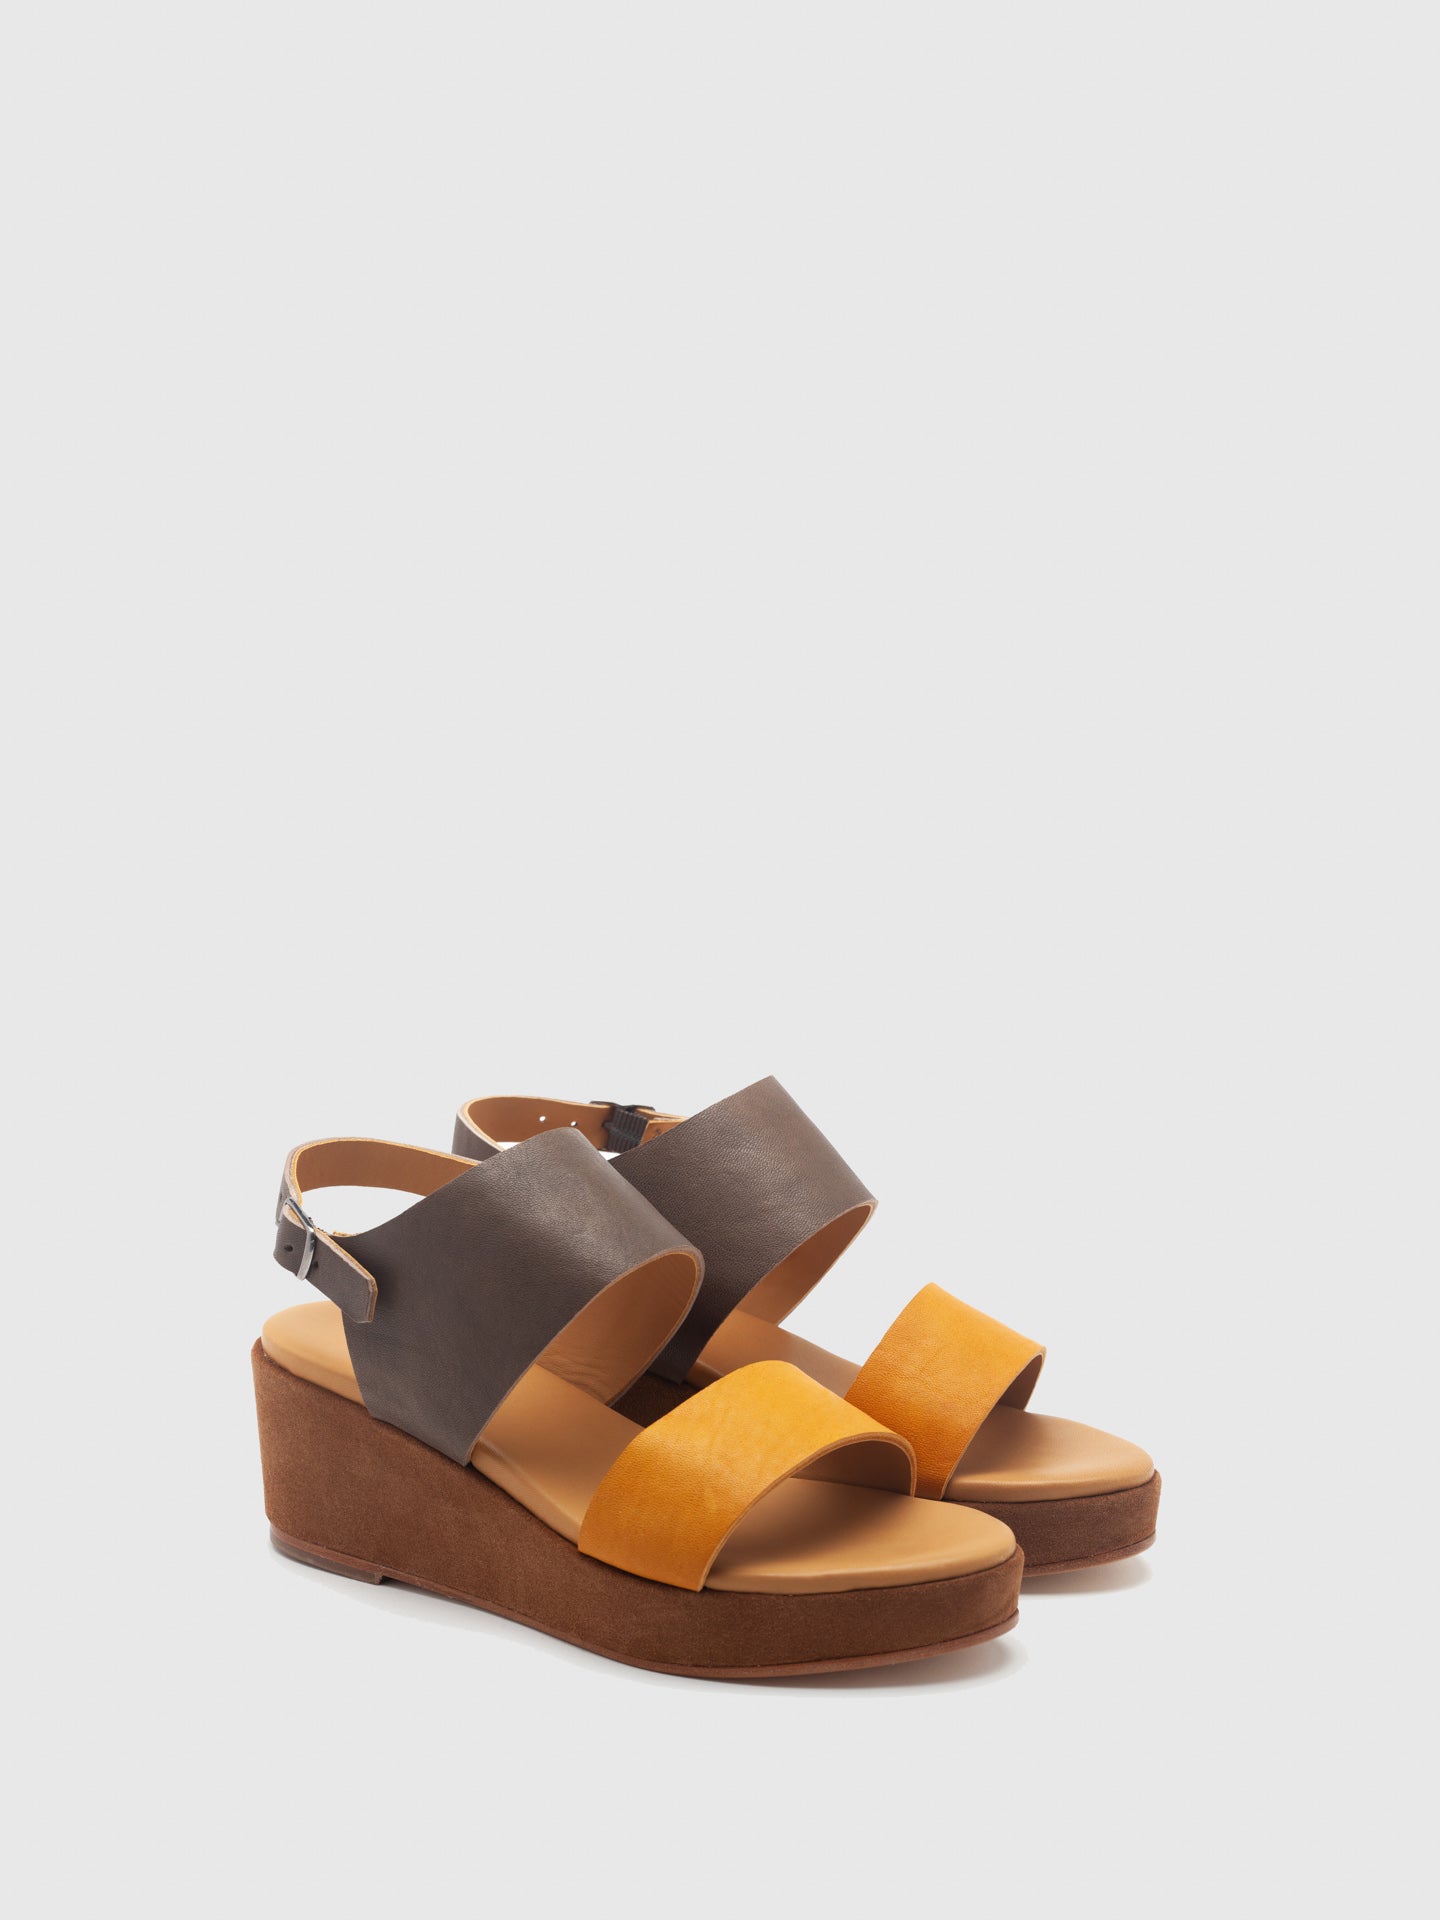 Only2Me Yellow Brown Mix Platform Sandals